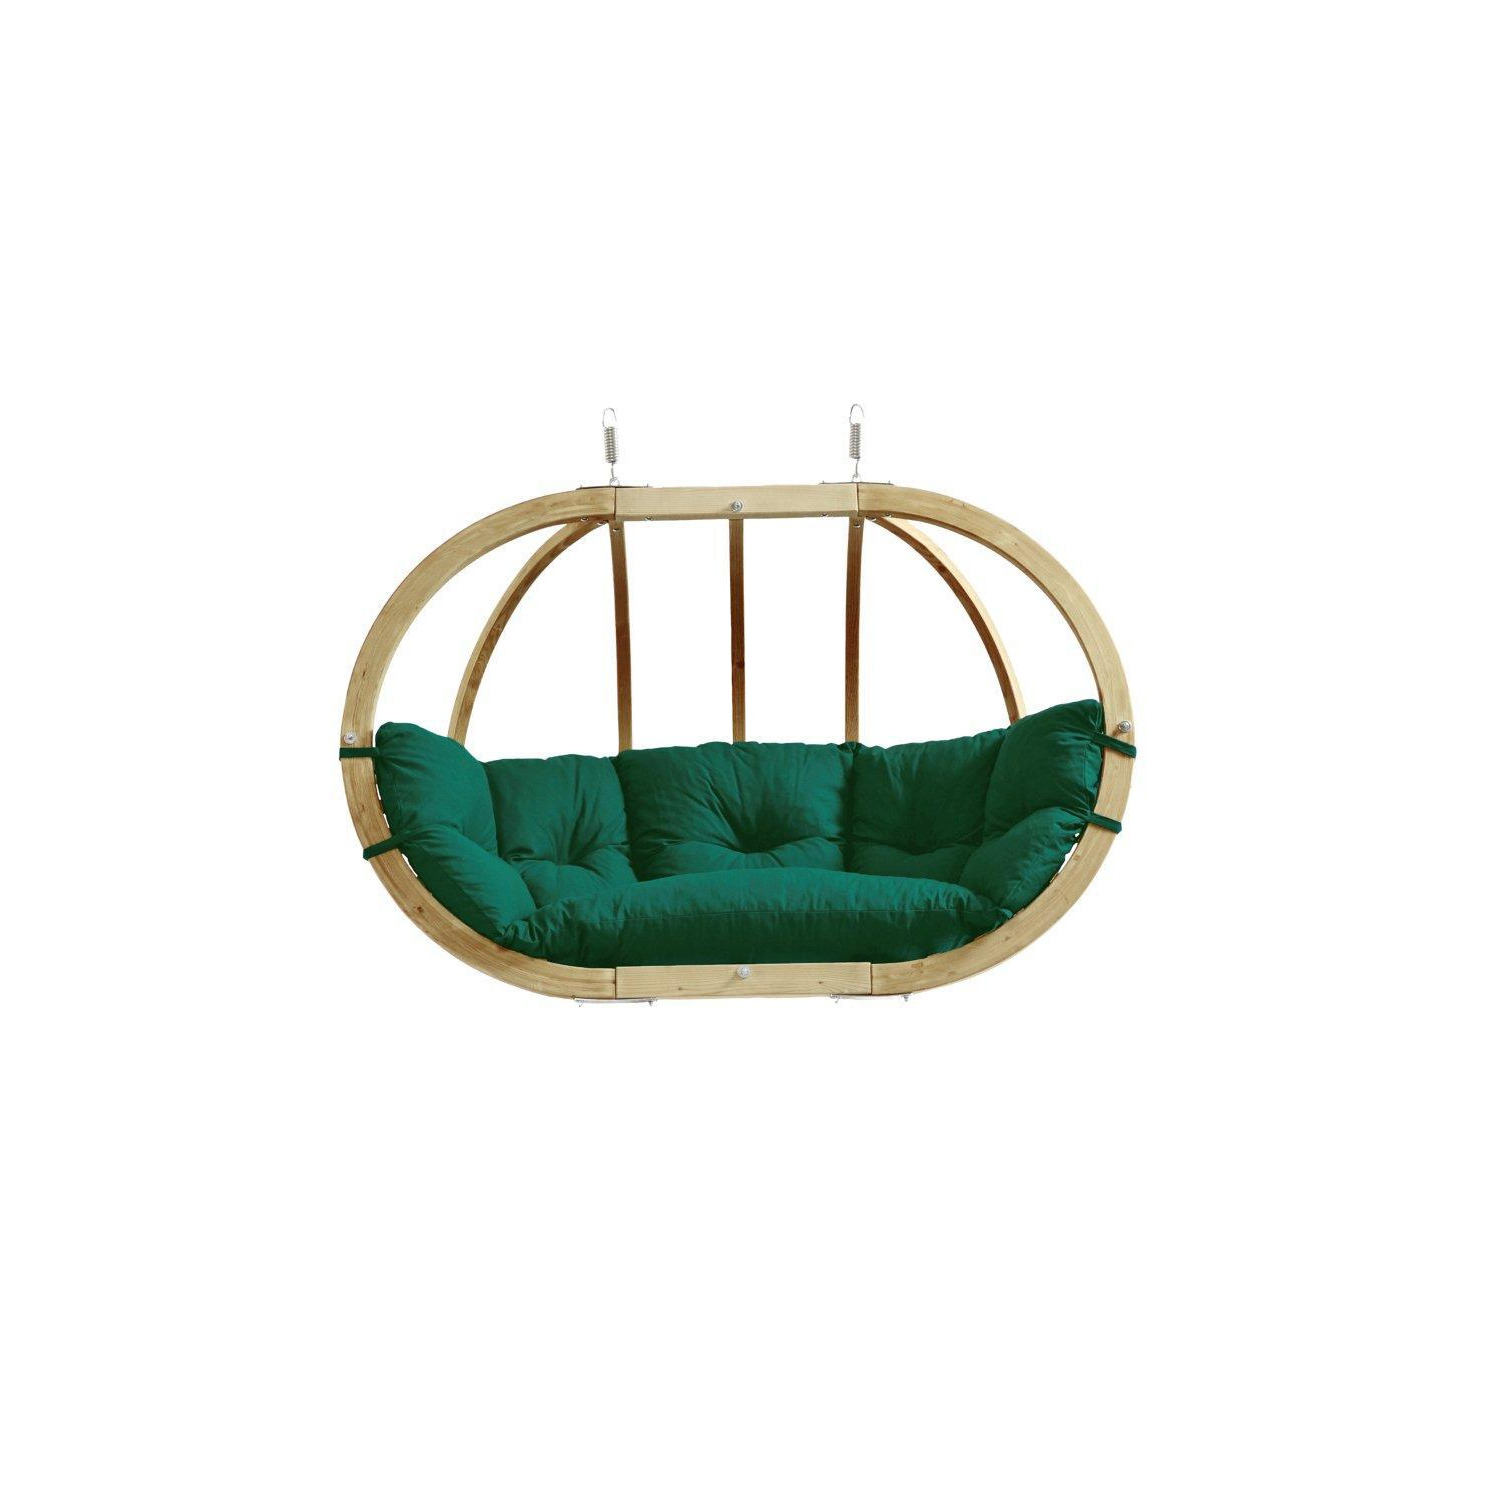 Globo Double Royal Wooden Cushion Egg Hanging Chair - Verde - image 1